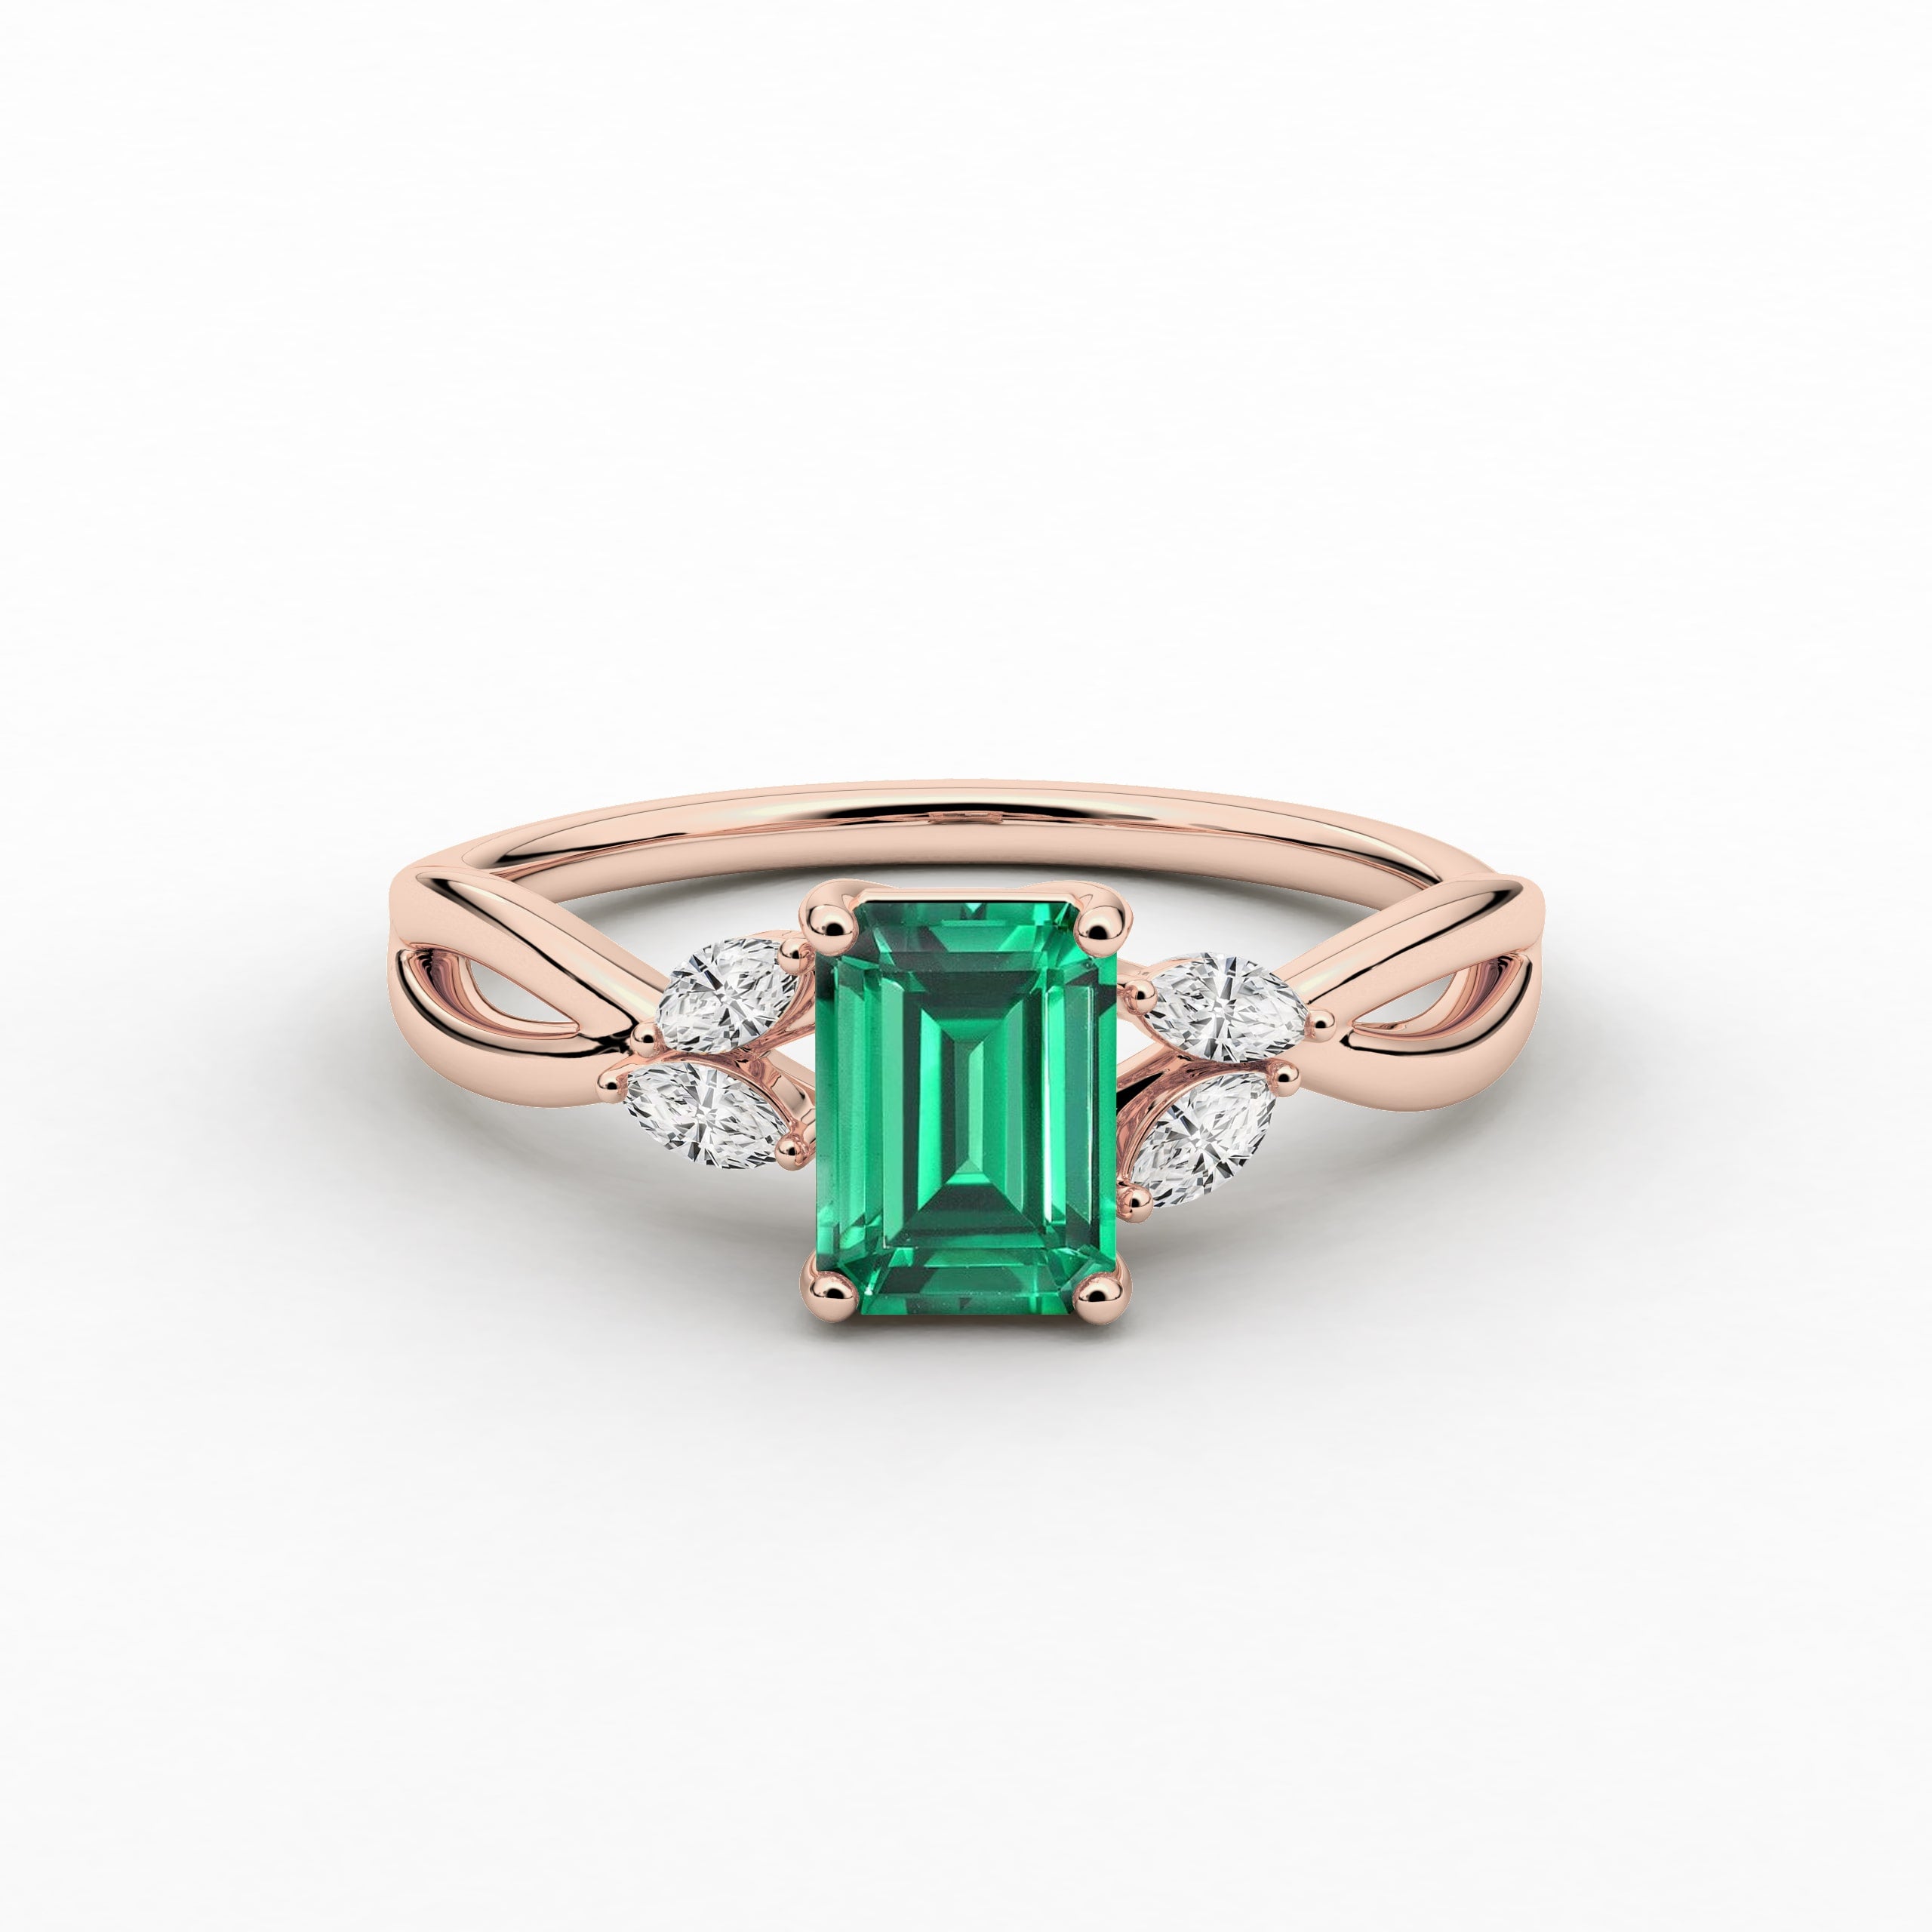  Emerald Cut Green Emerald Cut Nature Inspired Engagement Ring In Rose Gold